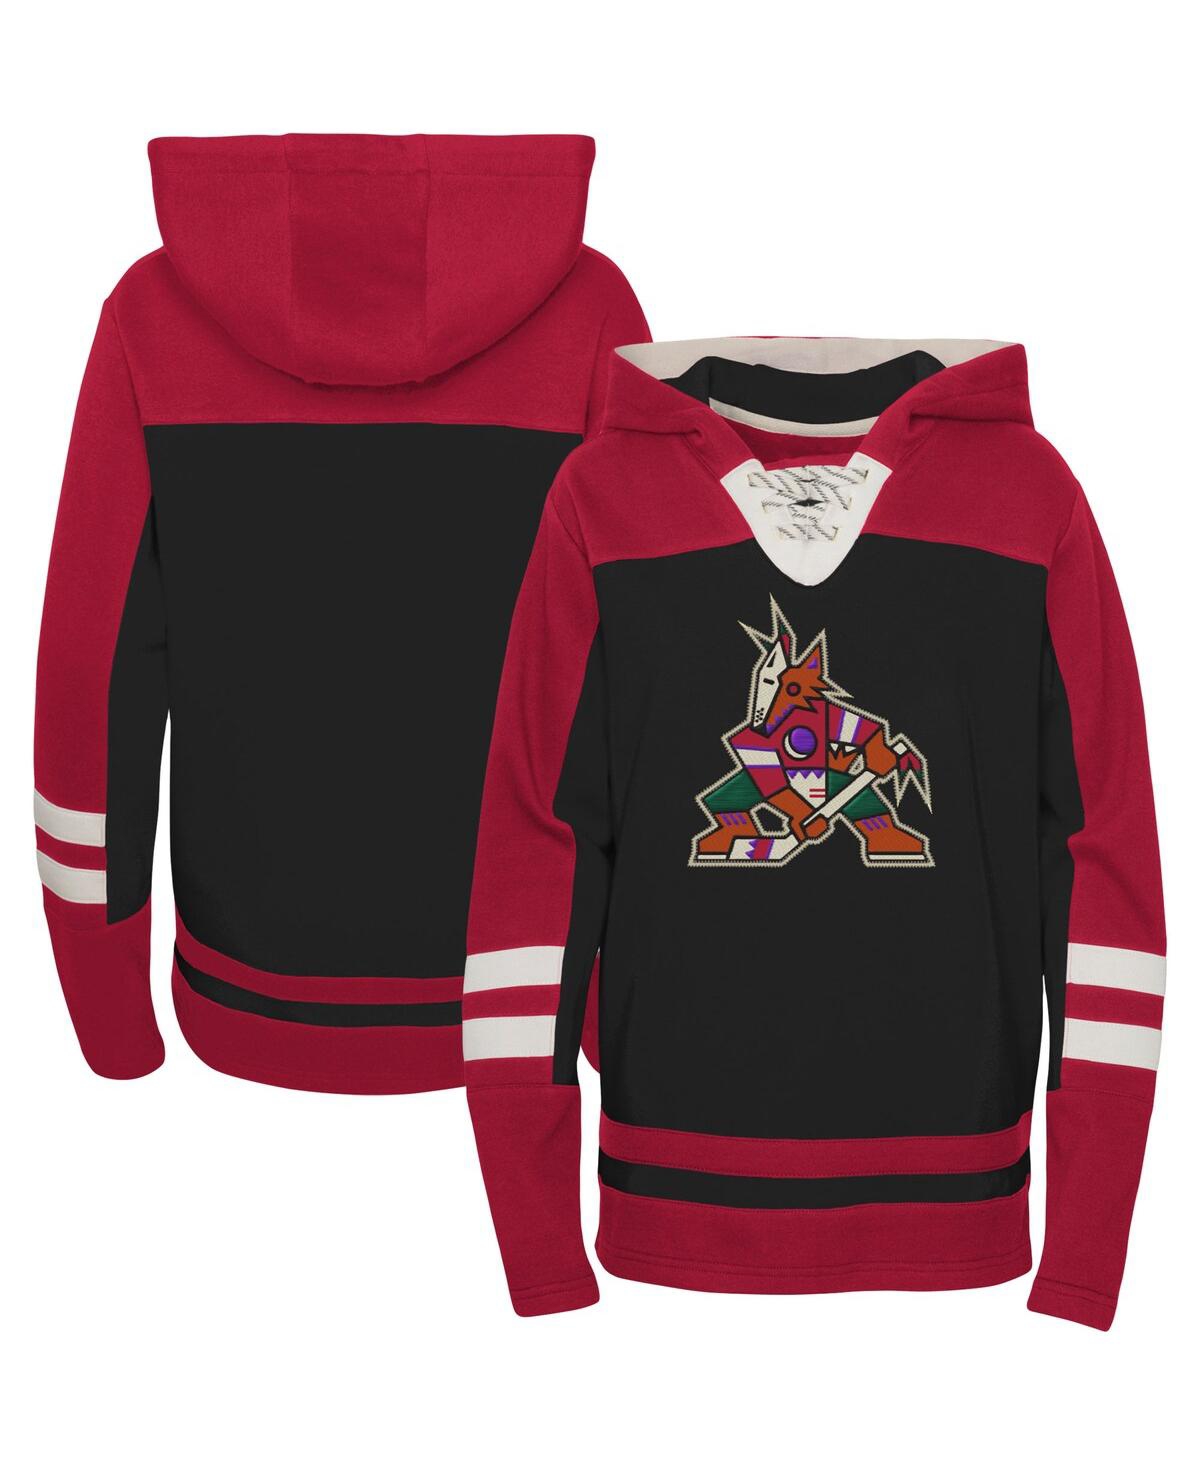 Outerstuff Kids' Big Boys And Girls Black Arizona Coyotes Ageless Revisited Home Lace-up Pullover Hoodie